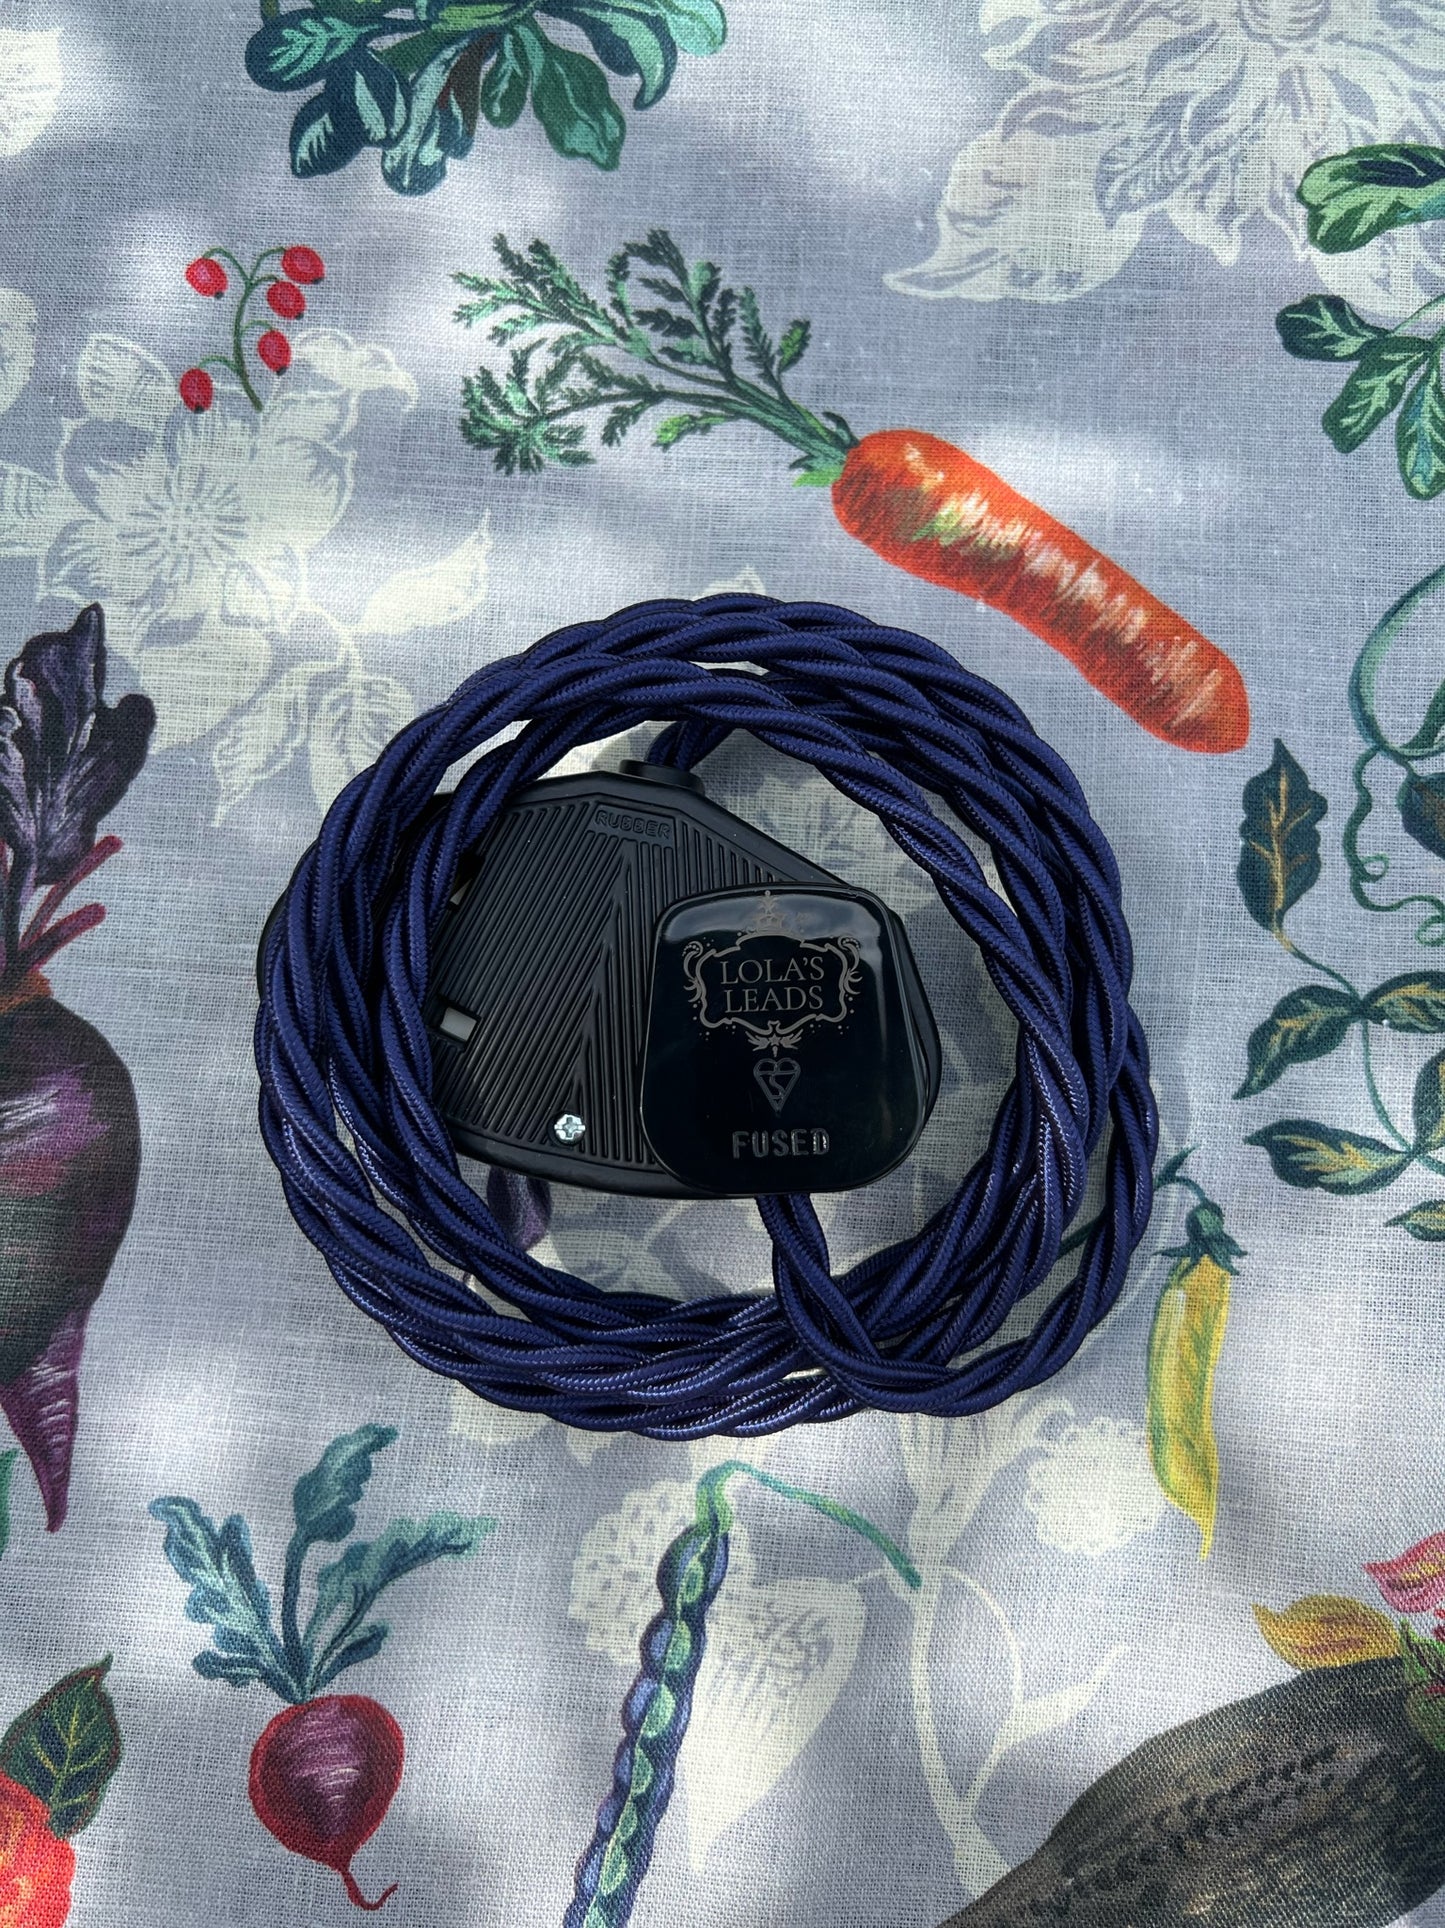 Indigo - Lola's Leads Fabric Extension Cable